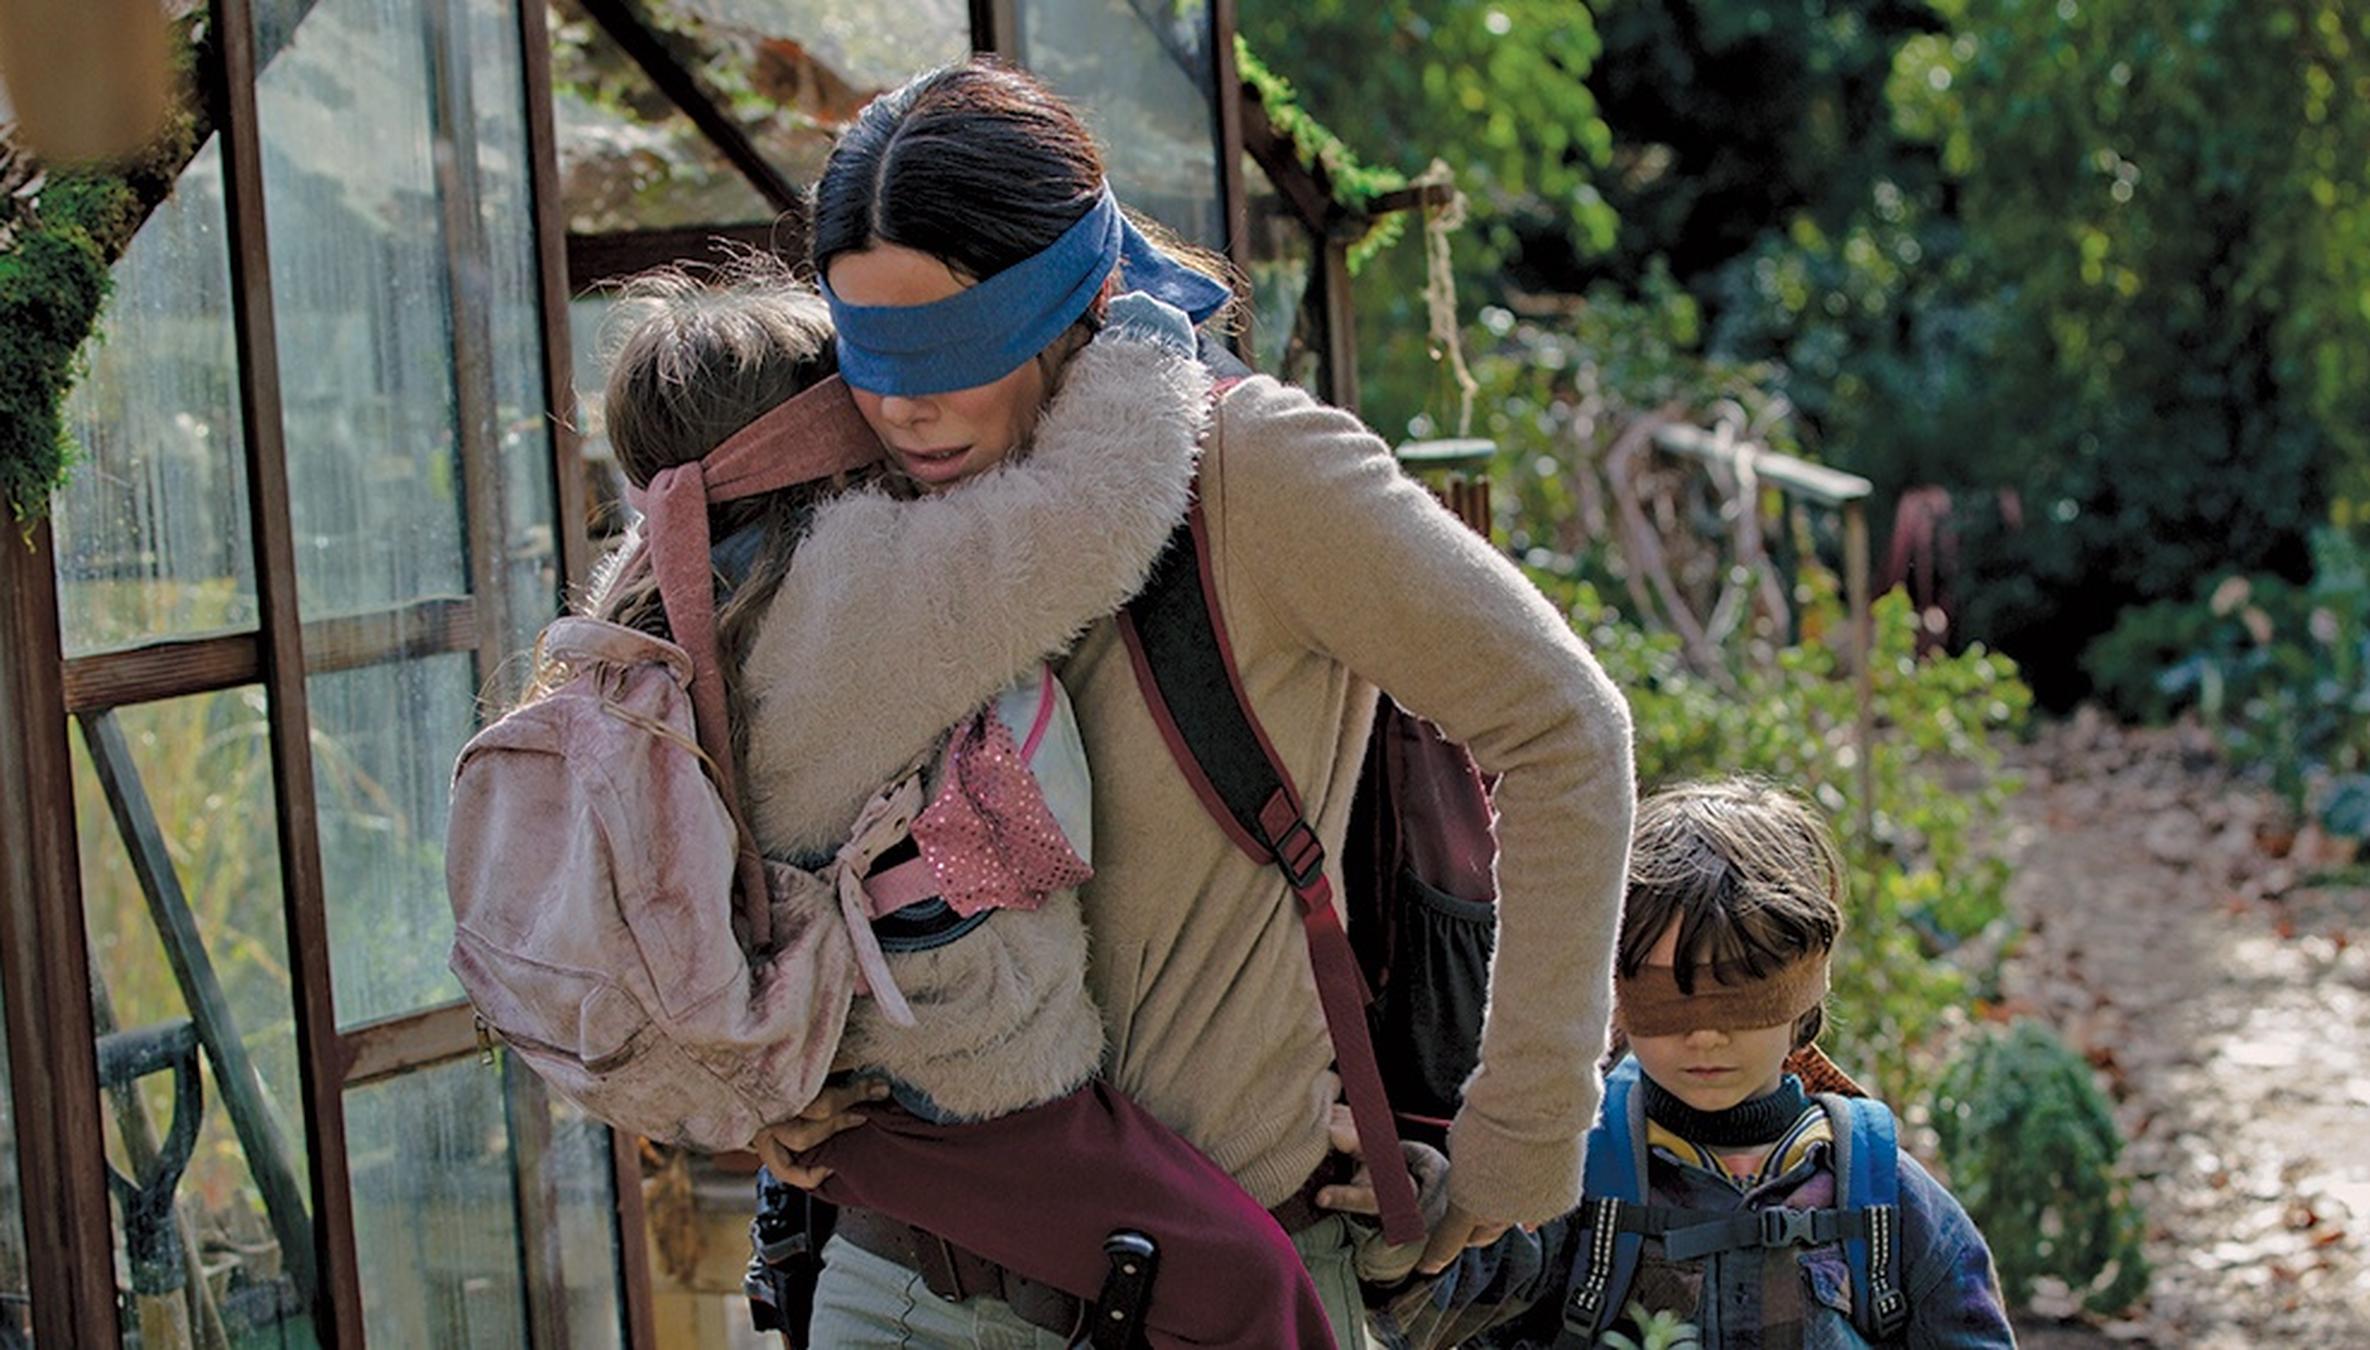 Rumorville: Blindfolds on—A ‘Bird Box’ Sequel Could Be Coming + What ...